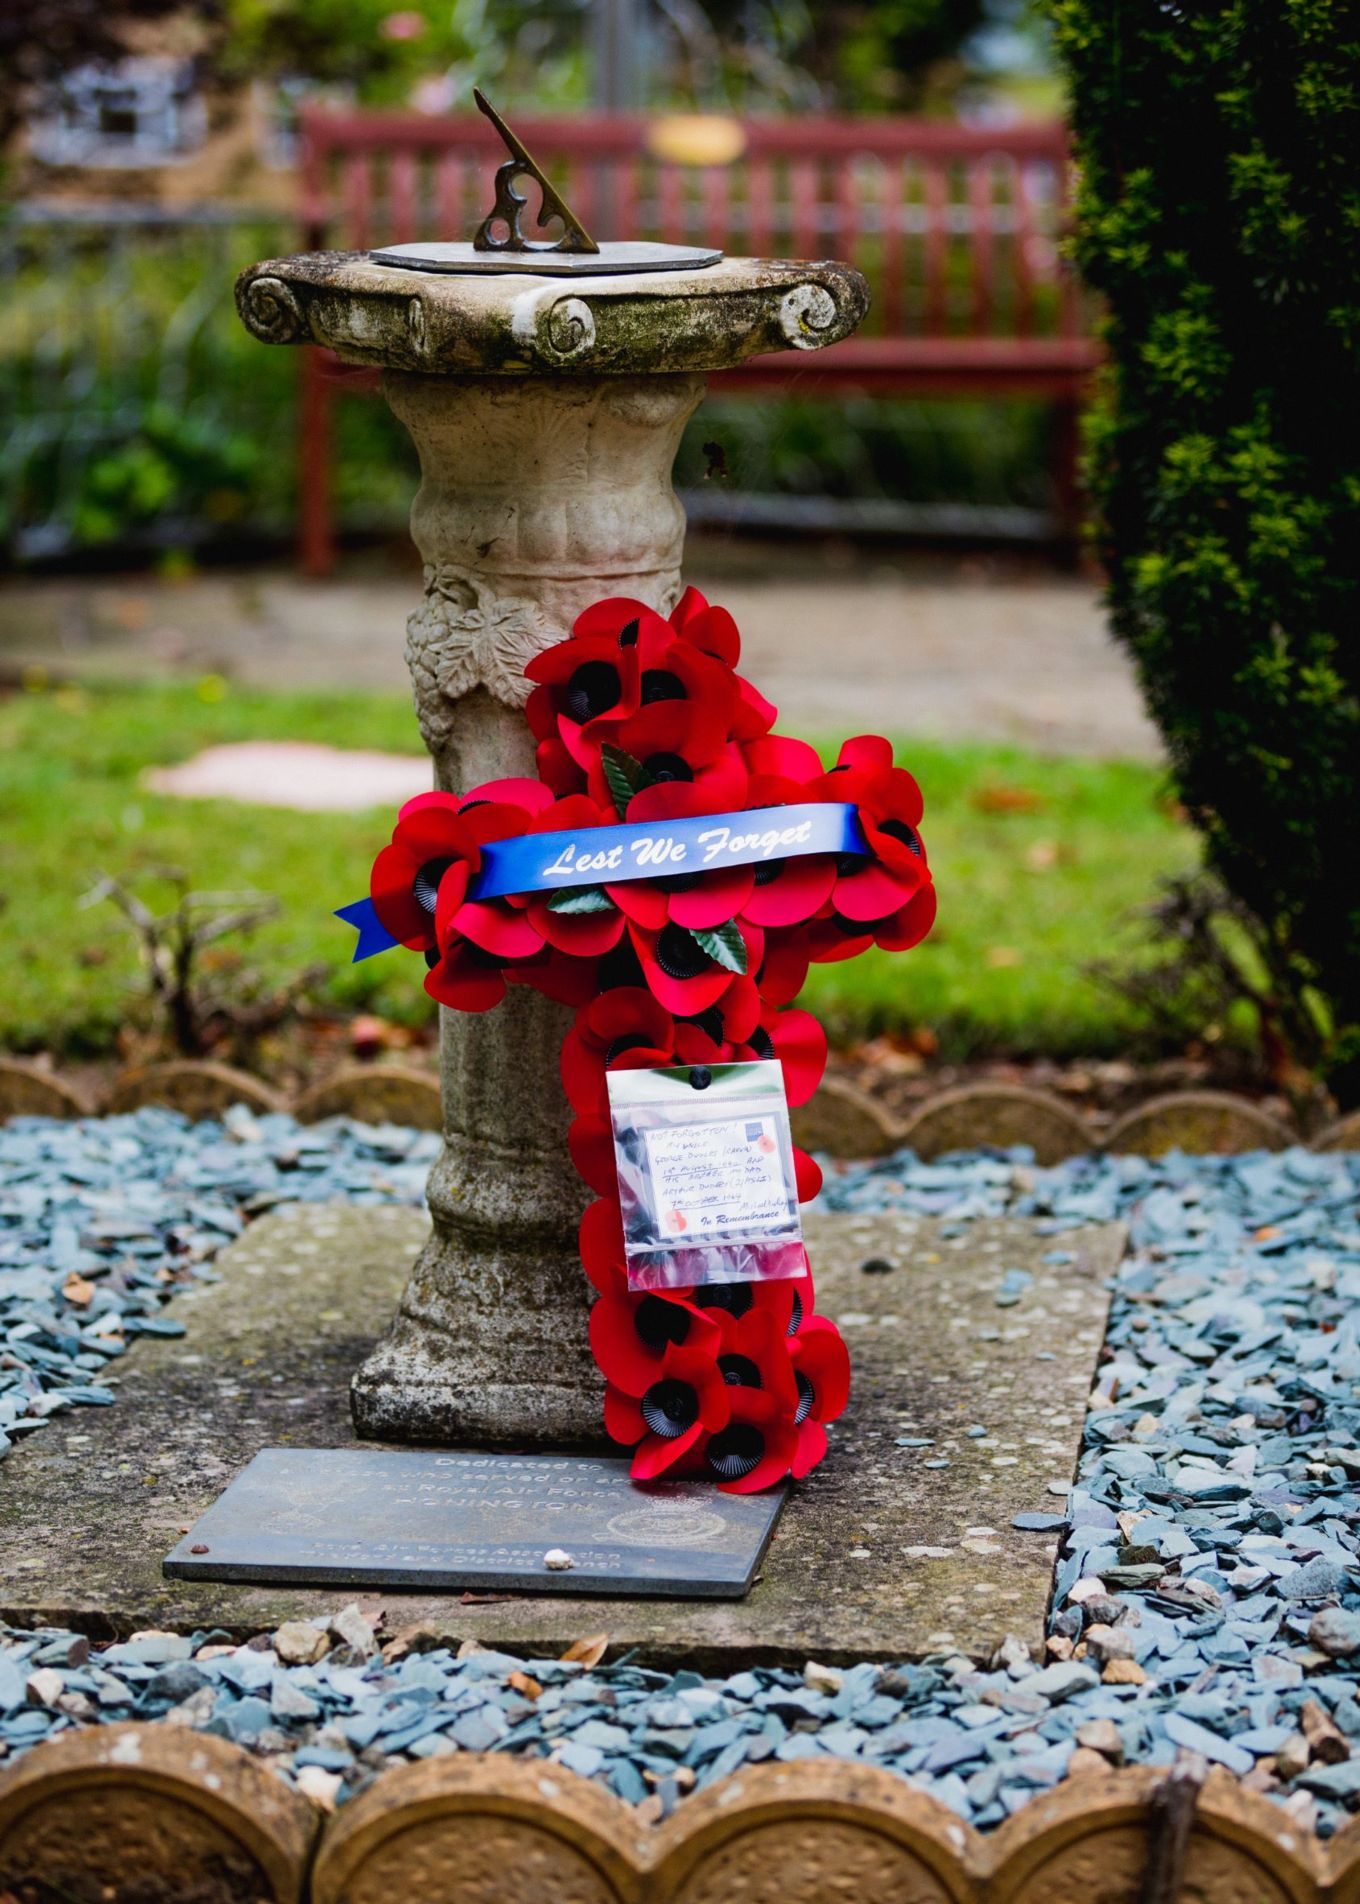 Poppy Cross at the Memorial laid by Michael